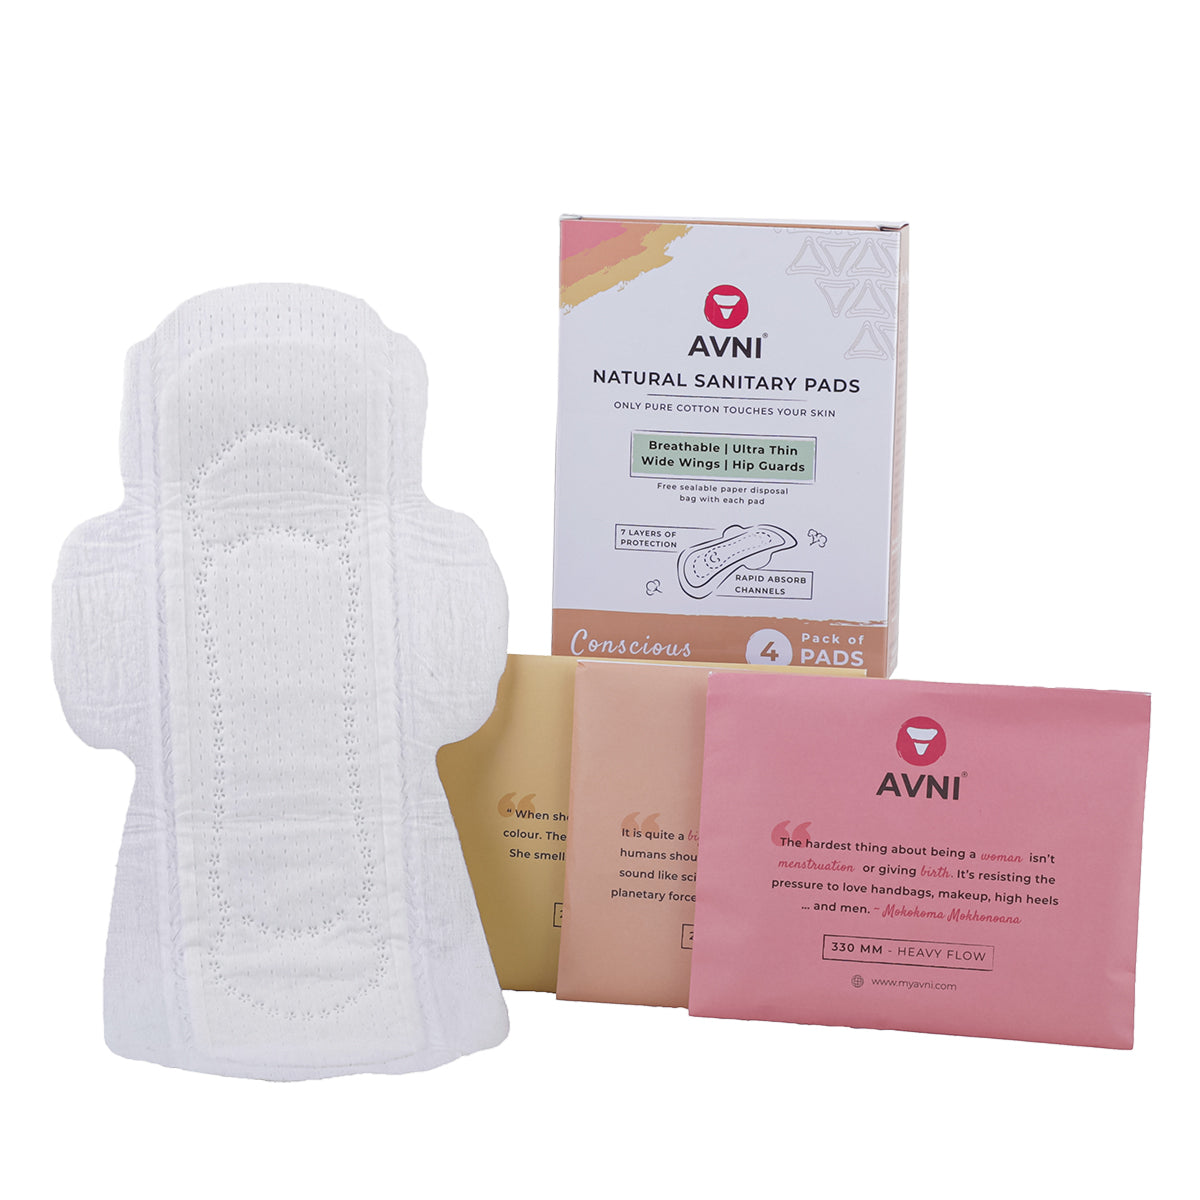 Natural Cotton Sanitary Pads - Trial Pack of 4 Pads